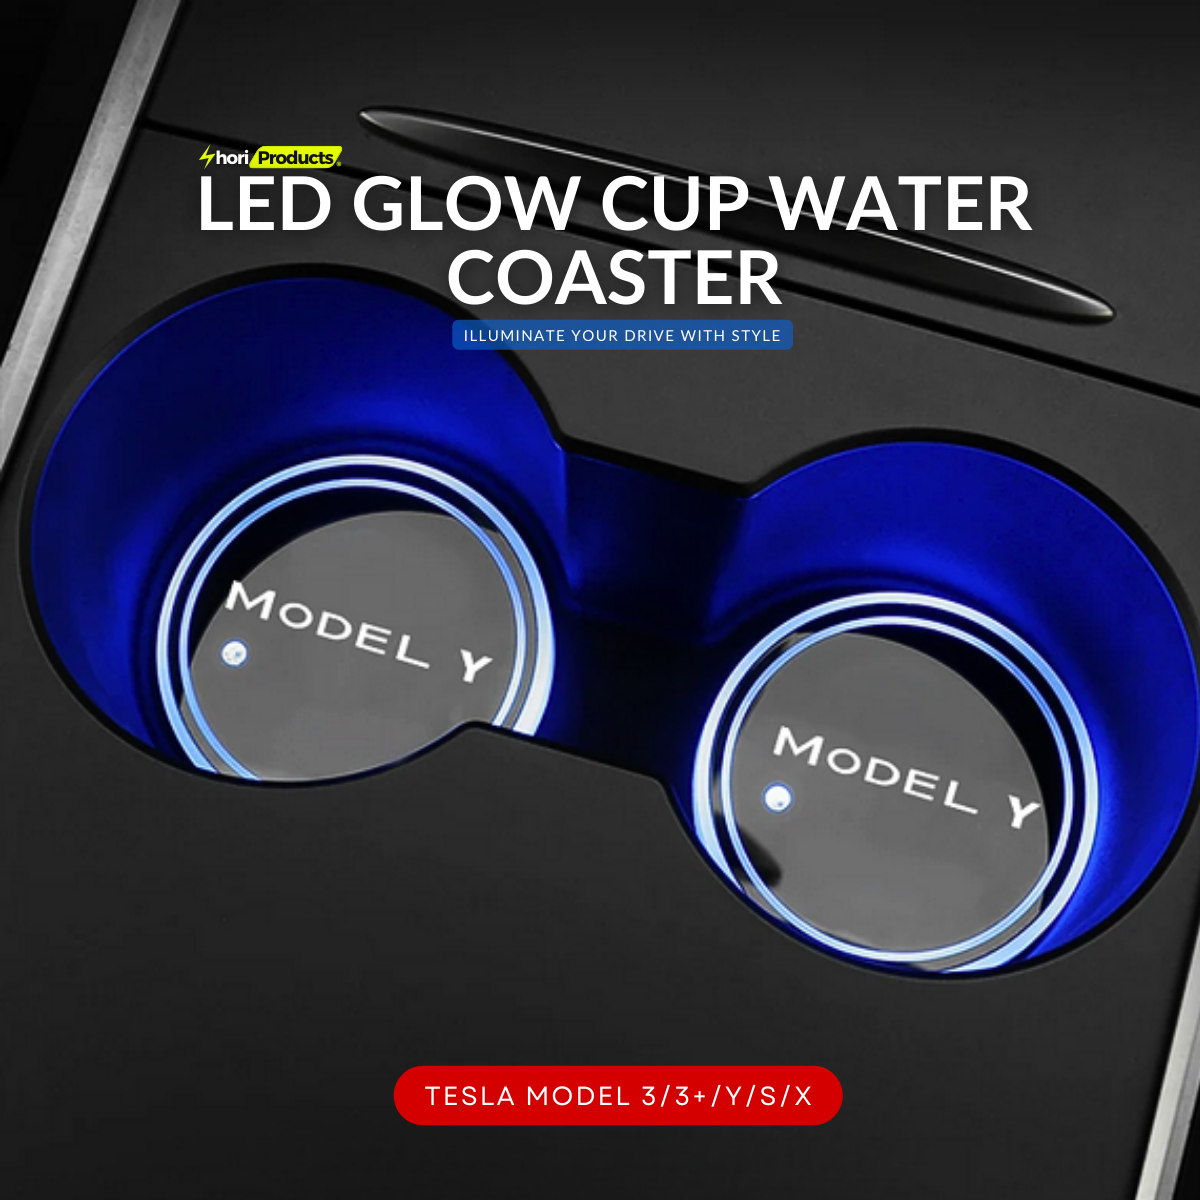 LED Glow Cup Water Coaster